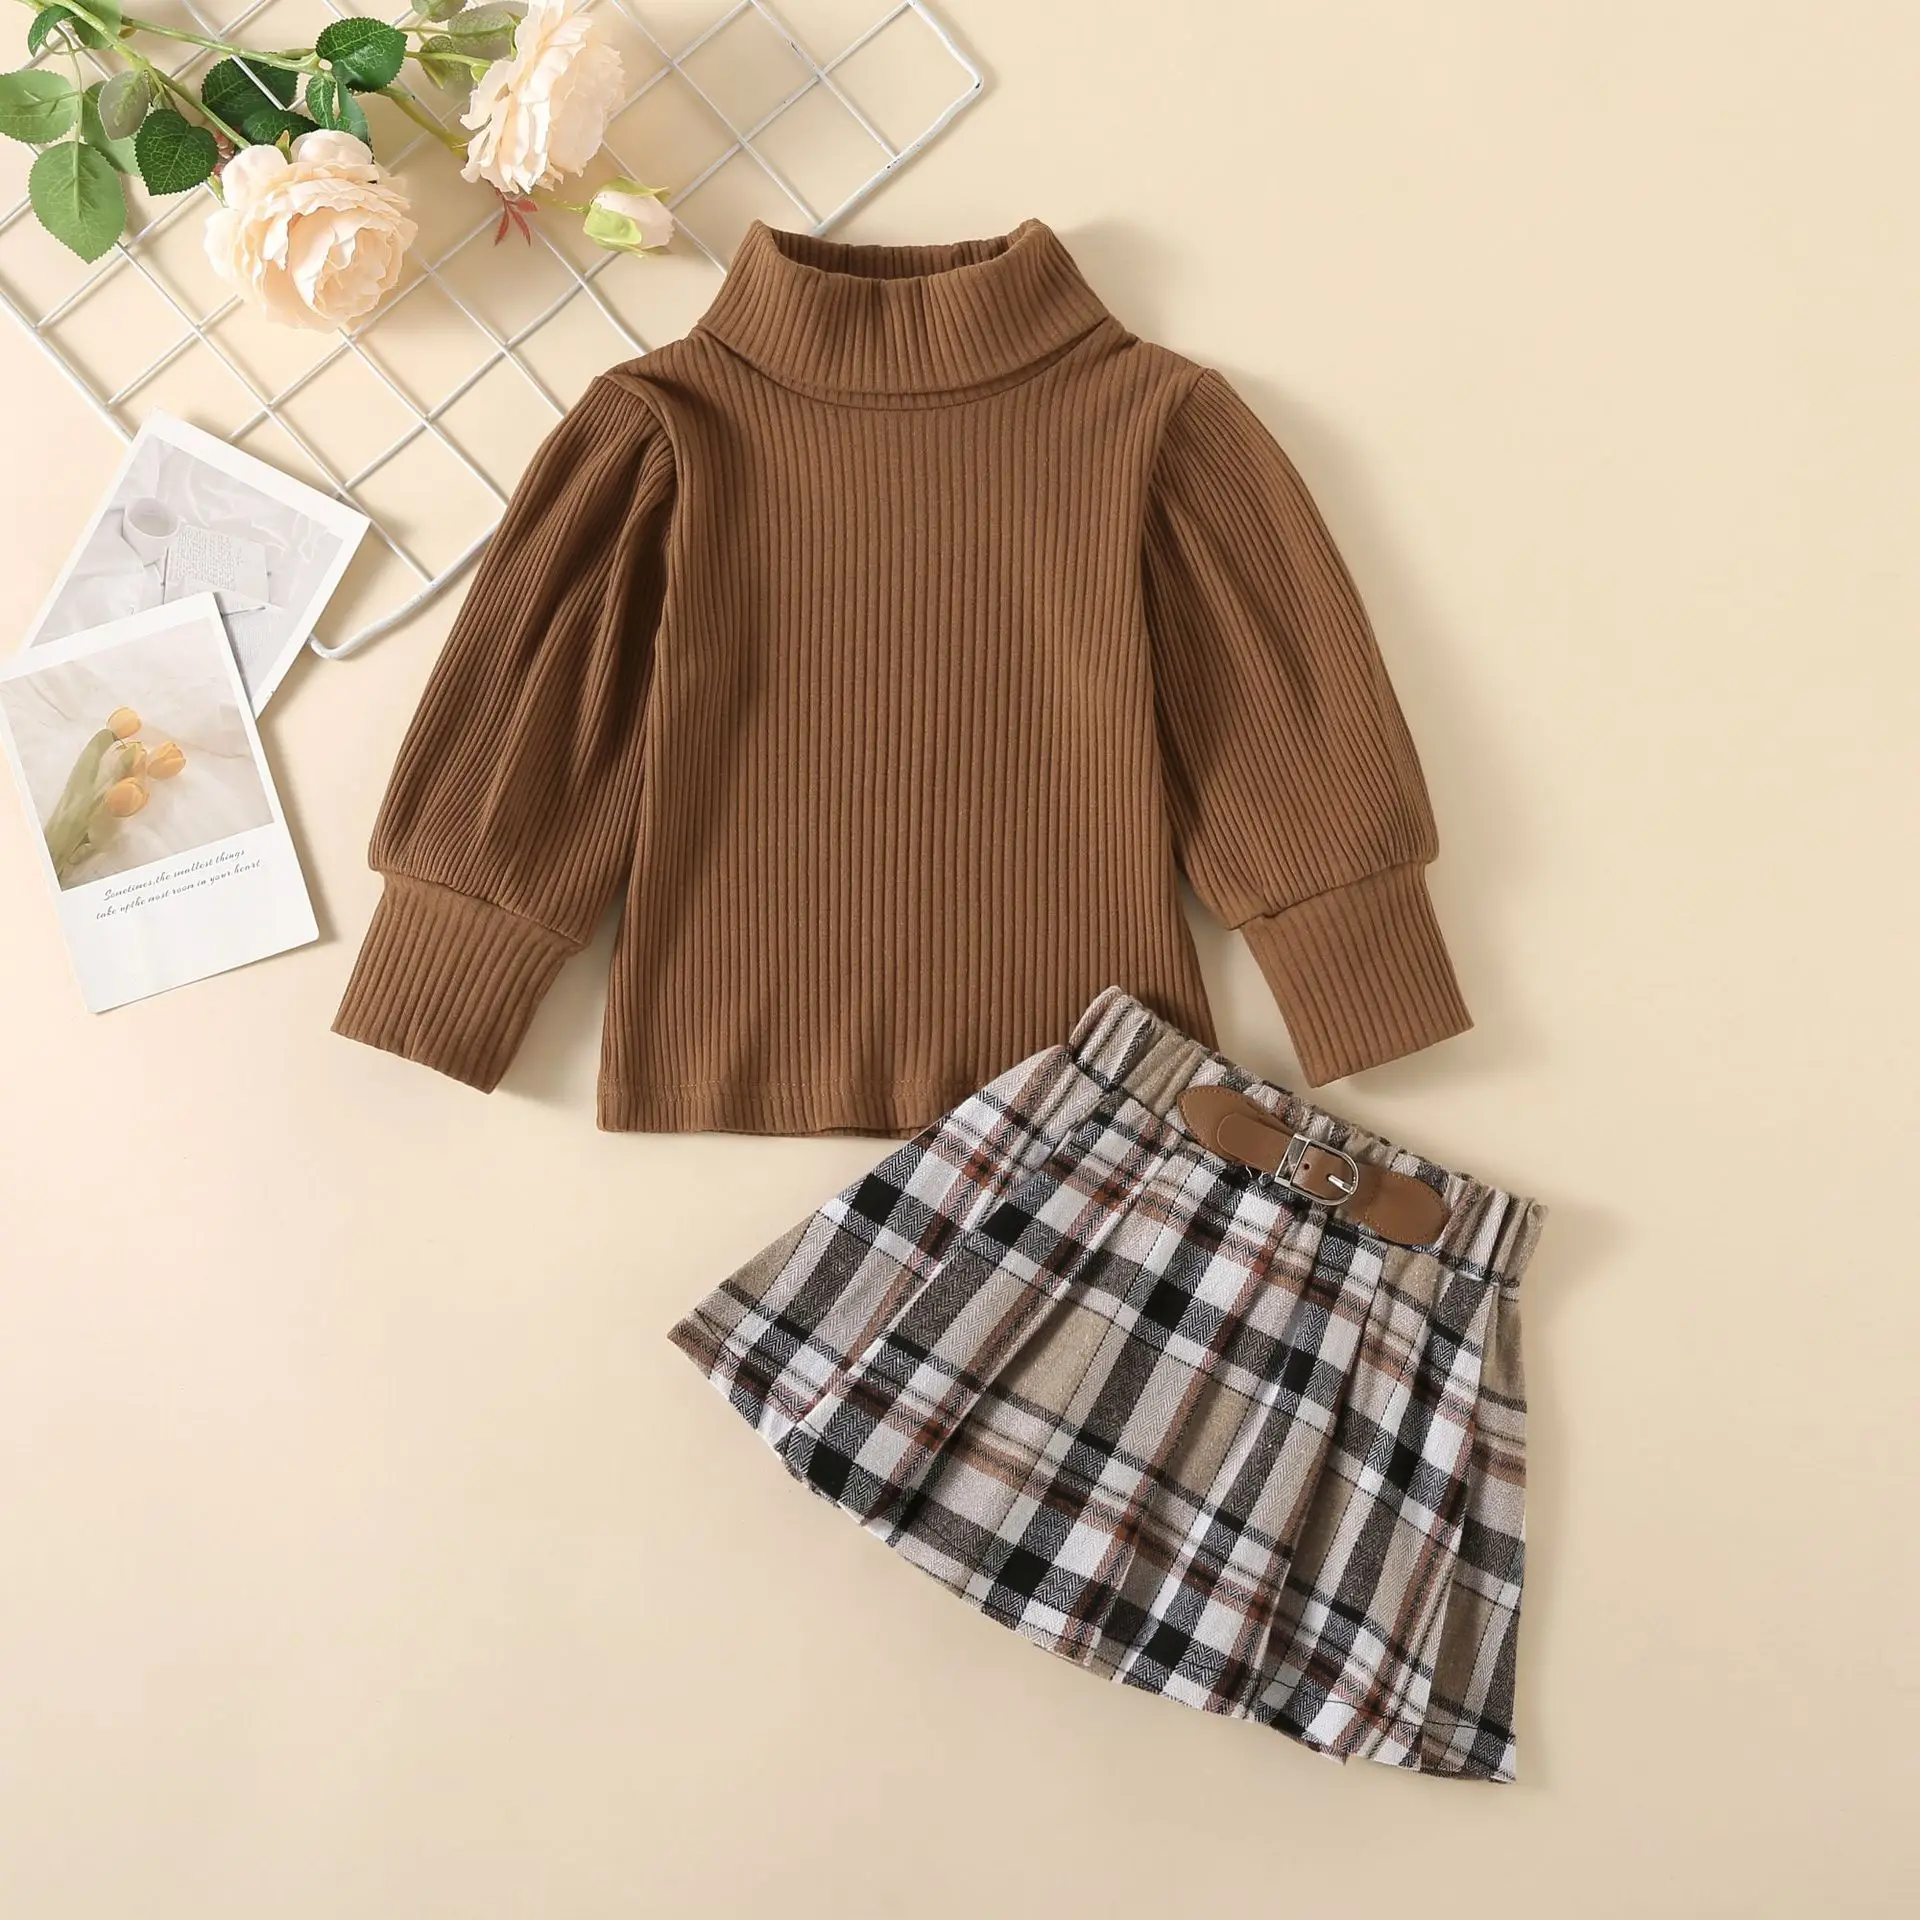 9M-5T Kids Girls Spring Autumn Clothes Set Baby College Style High Collar Pit Top+Plaid Pleated Skirt Trend Children Outfit 2Pcs